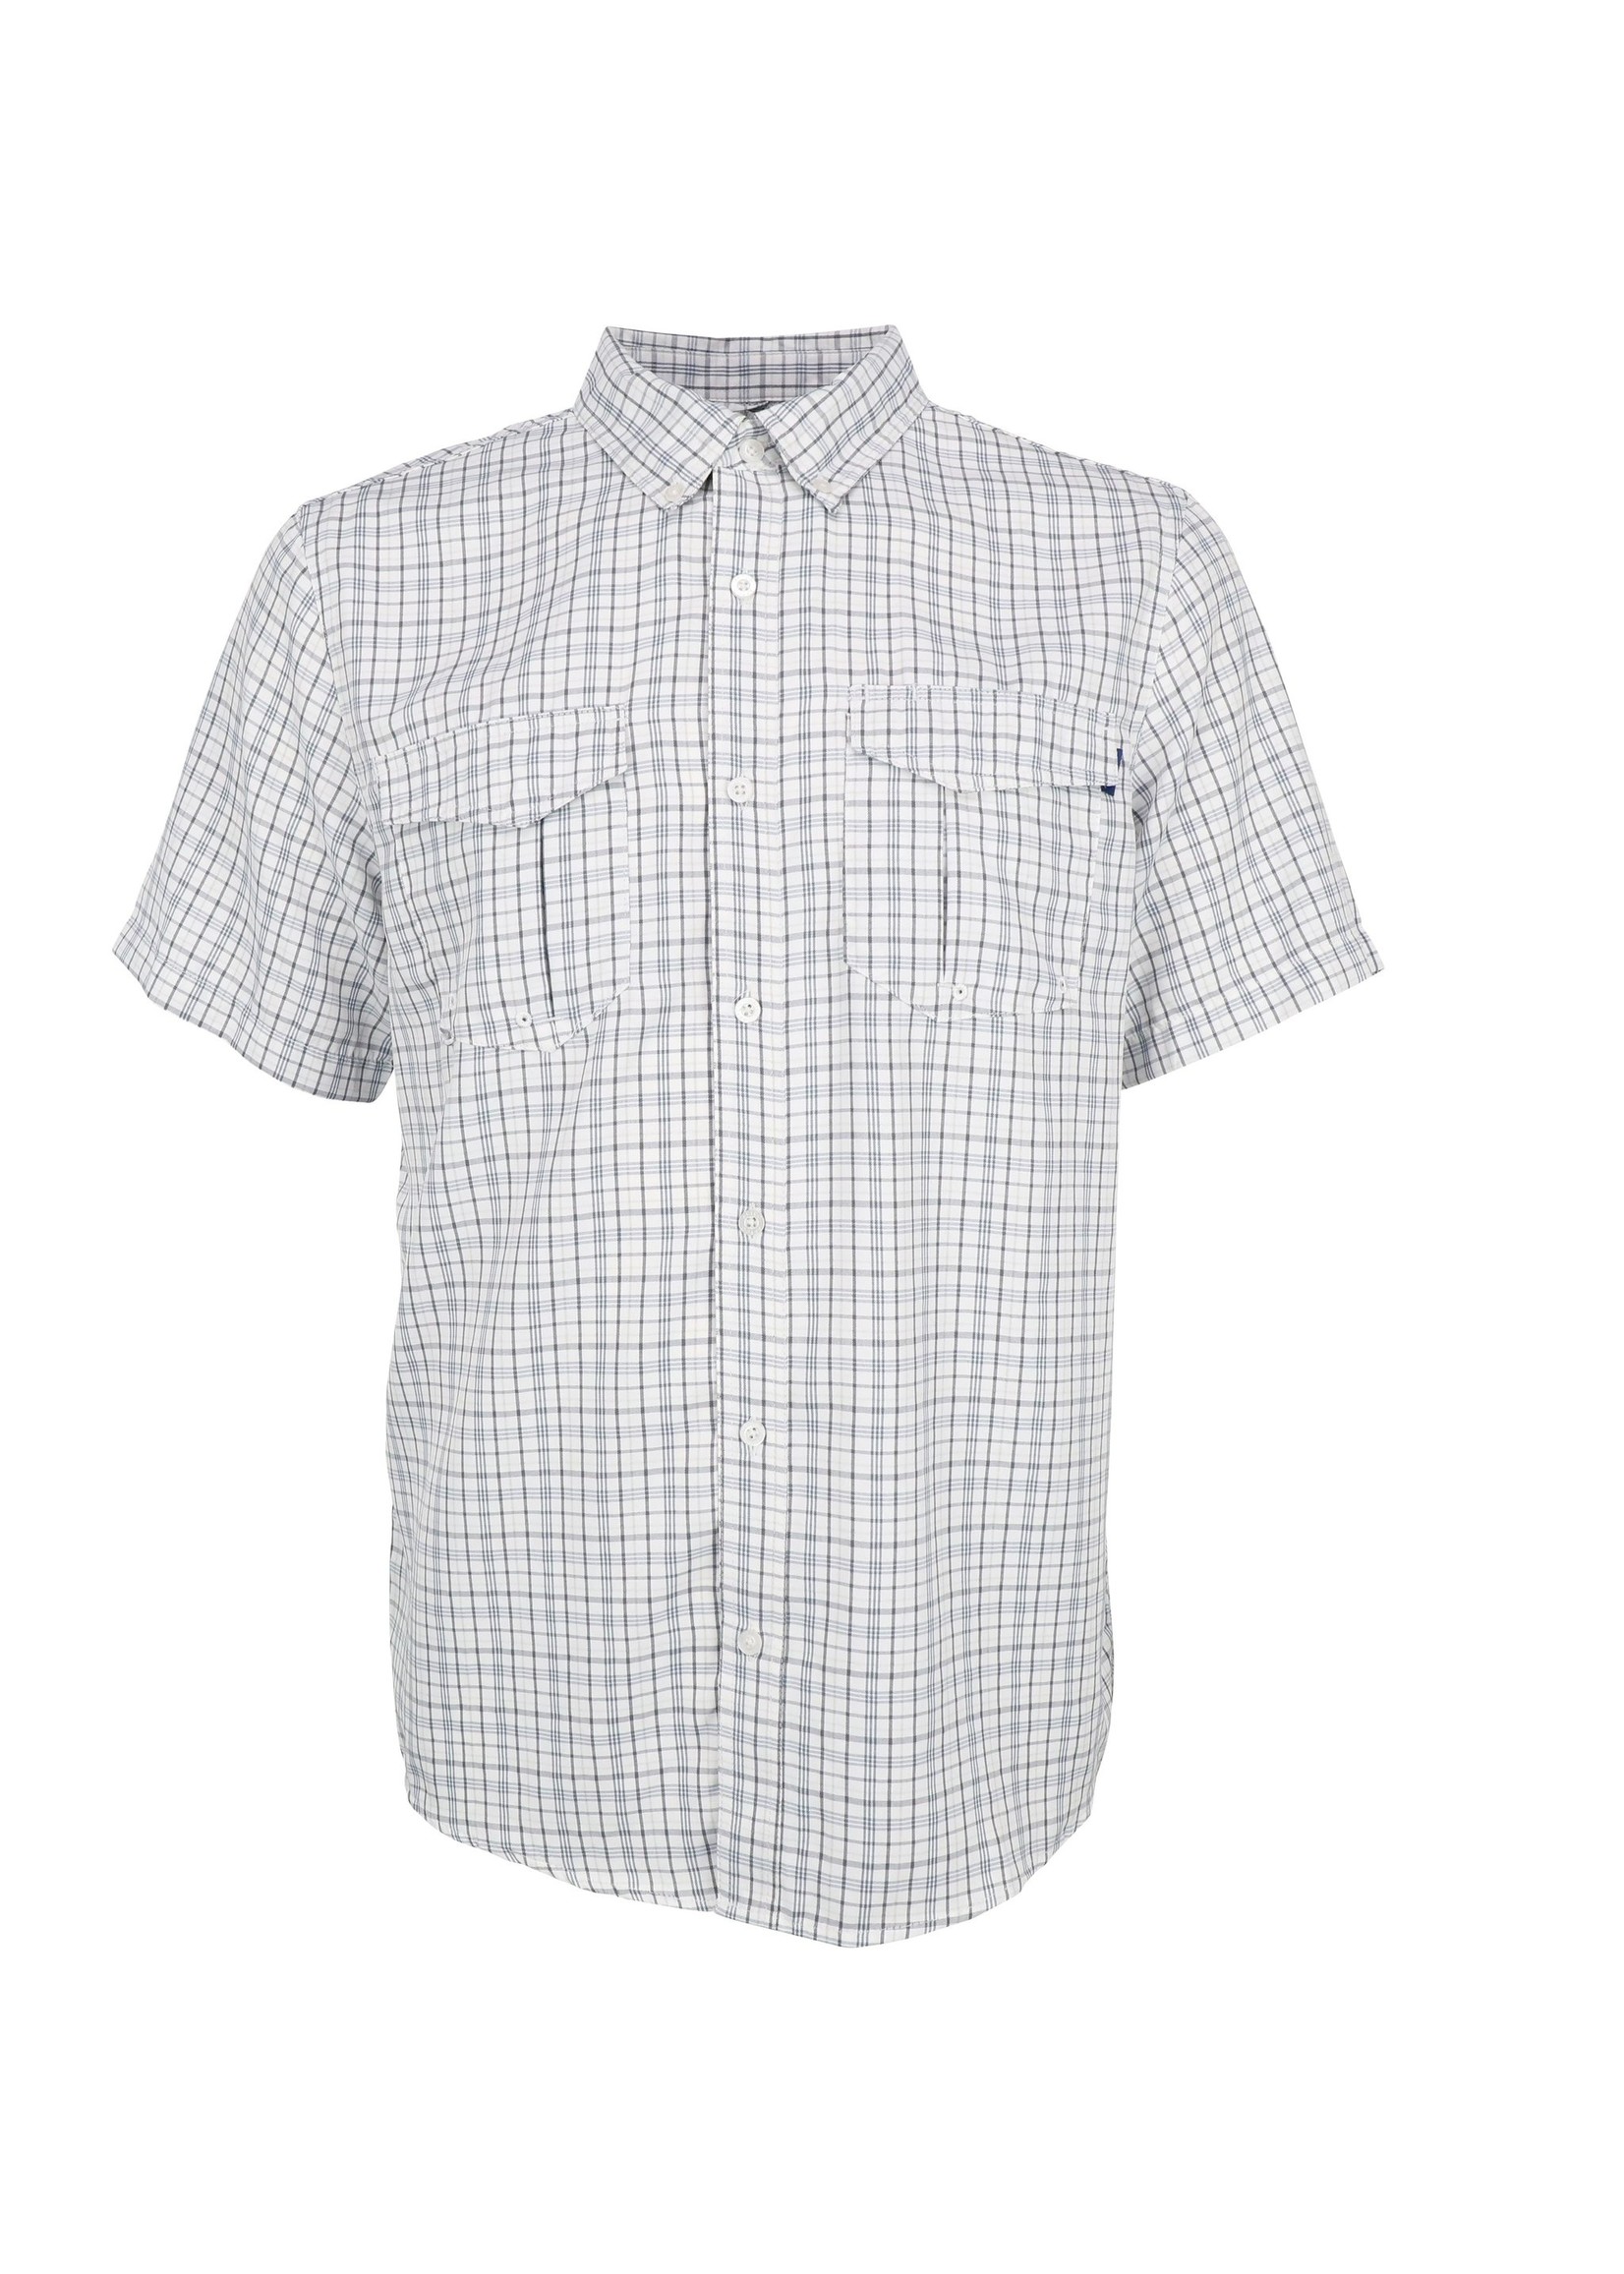 AFTCO Intersection Short Sleeve Botton Down Shirt